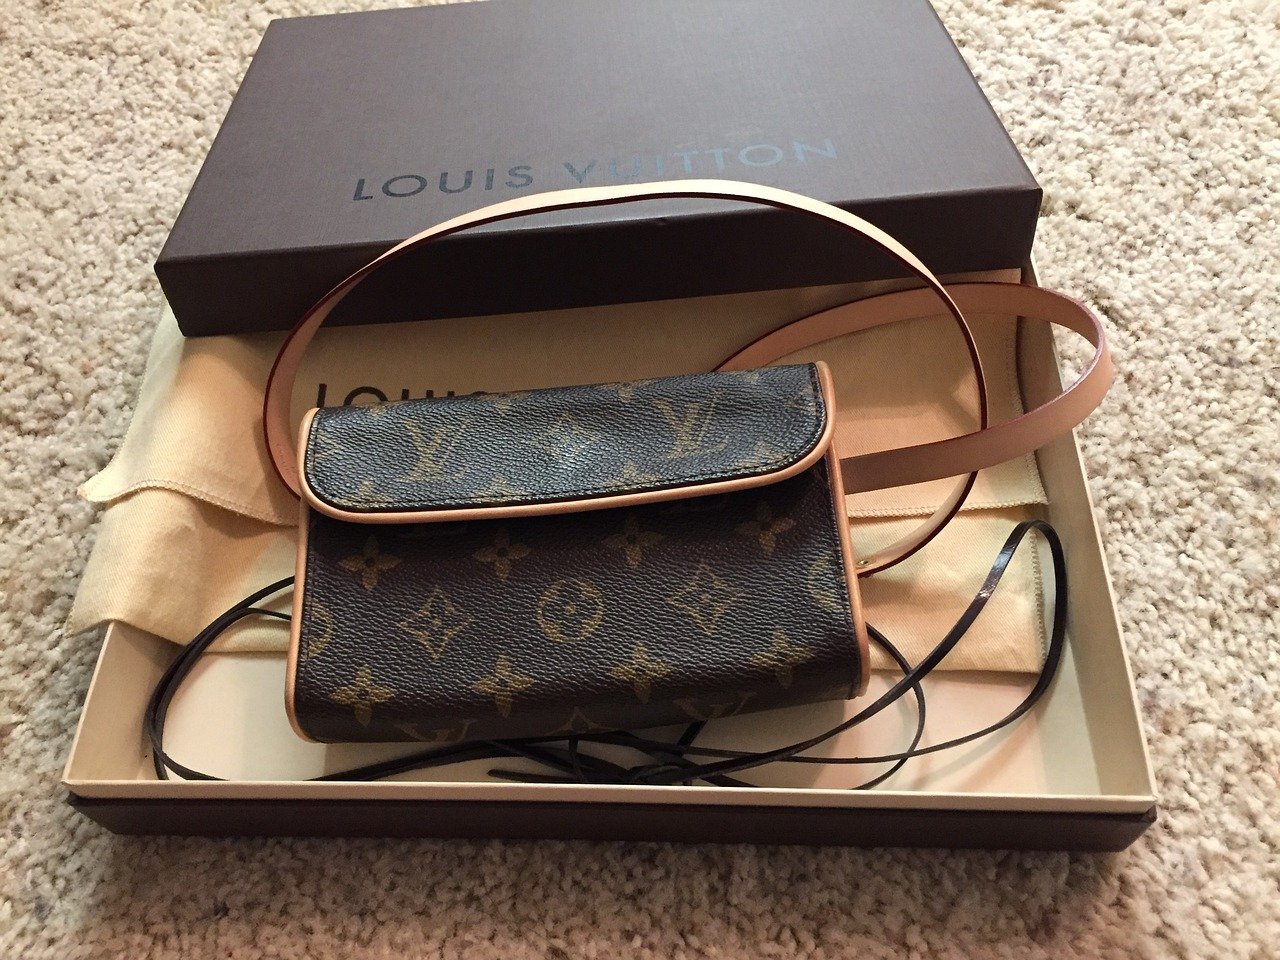 Why You Should Consider Purchasing a Secondhand Louis Vuitton Bag